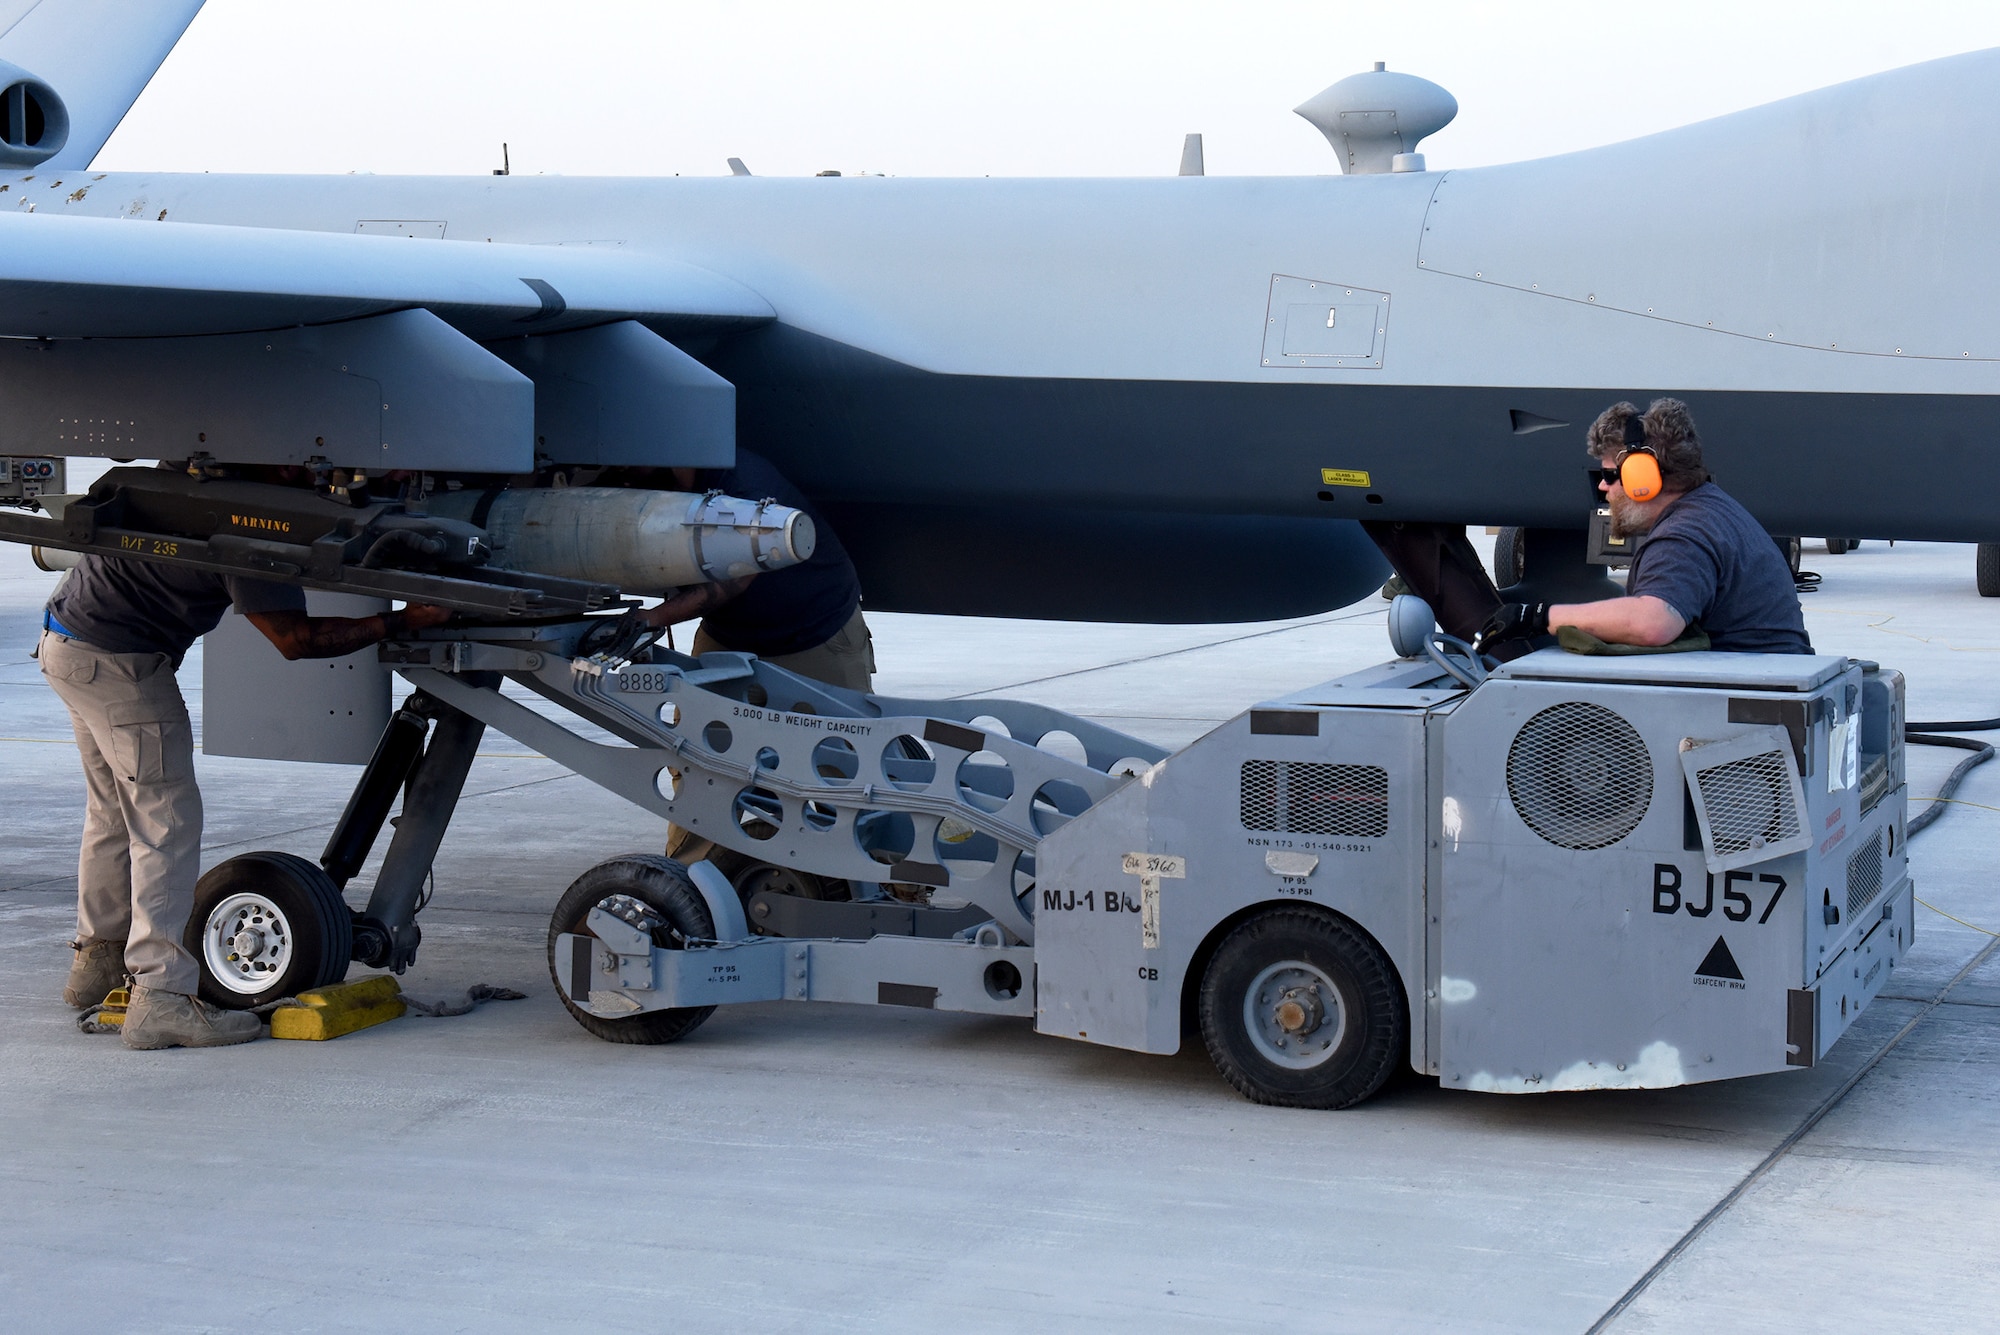 Amentum Contractors with the 62nd Expeditionary Attack Squadron at Al Dhafra Air Base, United Arab Emirates, attach a dummy munition to a U.S. MQ-9 Reaper during the Operation Agile Spartan 4 exercise, March 10, 2023. The exercise validated new Agile Combat Employment capabilities for Al Dhafra AB by simulating the establishment and use of mock cluster bases, which then reported back to the Wing Operations Center. (U.S. Air Force photo by Tech. Sgt. Chris Jacobs/released)